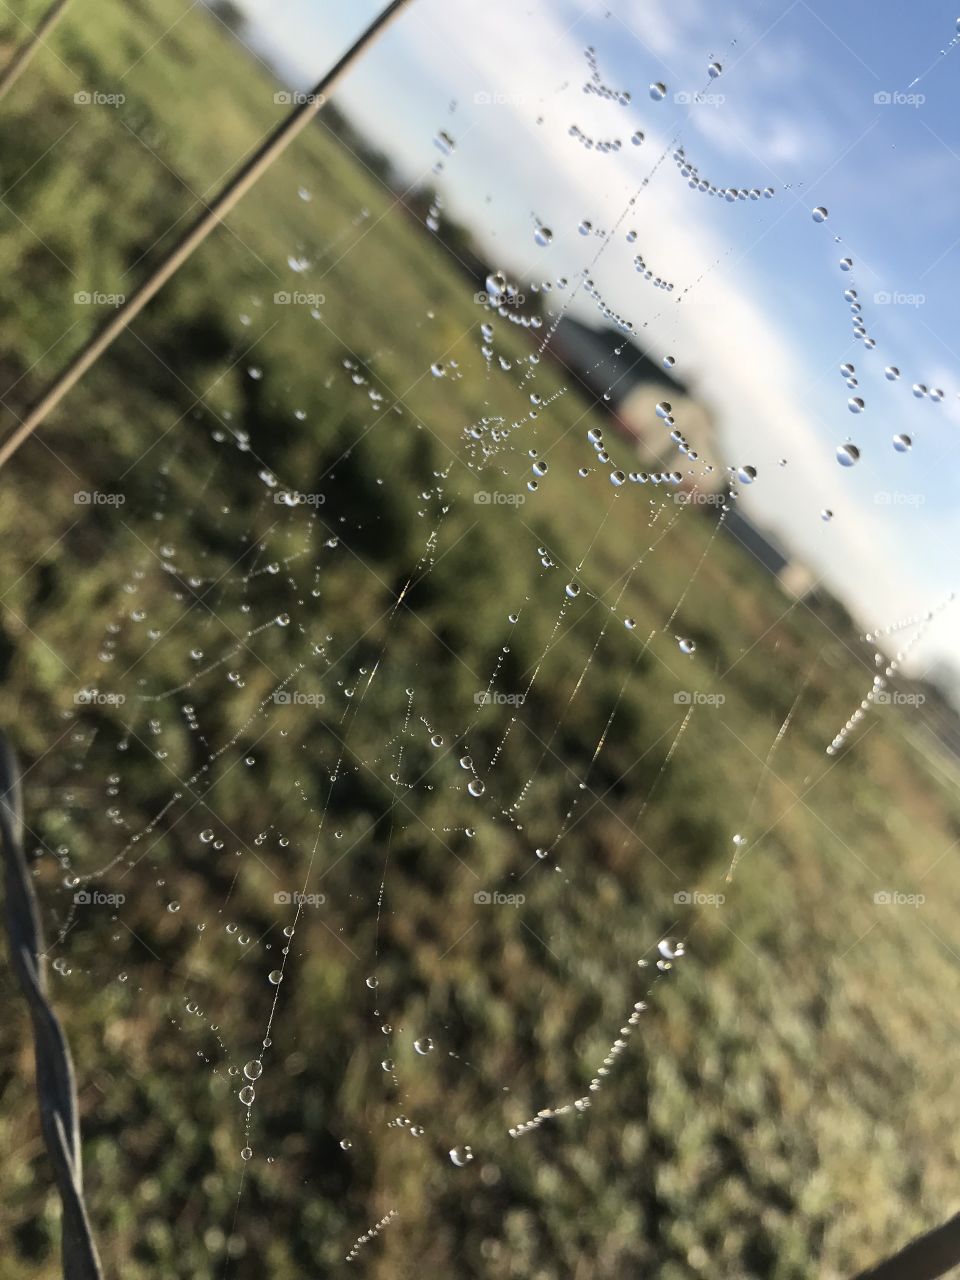 Beautiful water drops on a spider web that is attached to a barbed wire fence, with a barn and fields faded in the background.